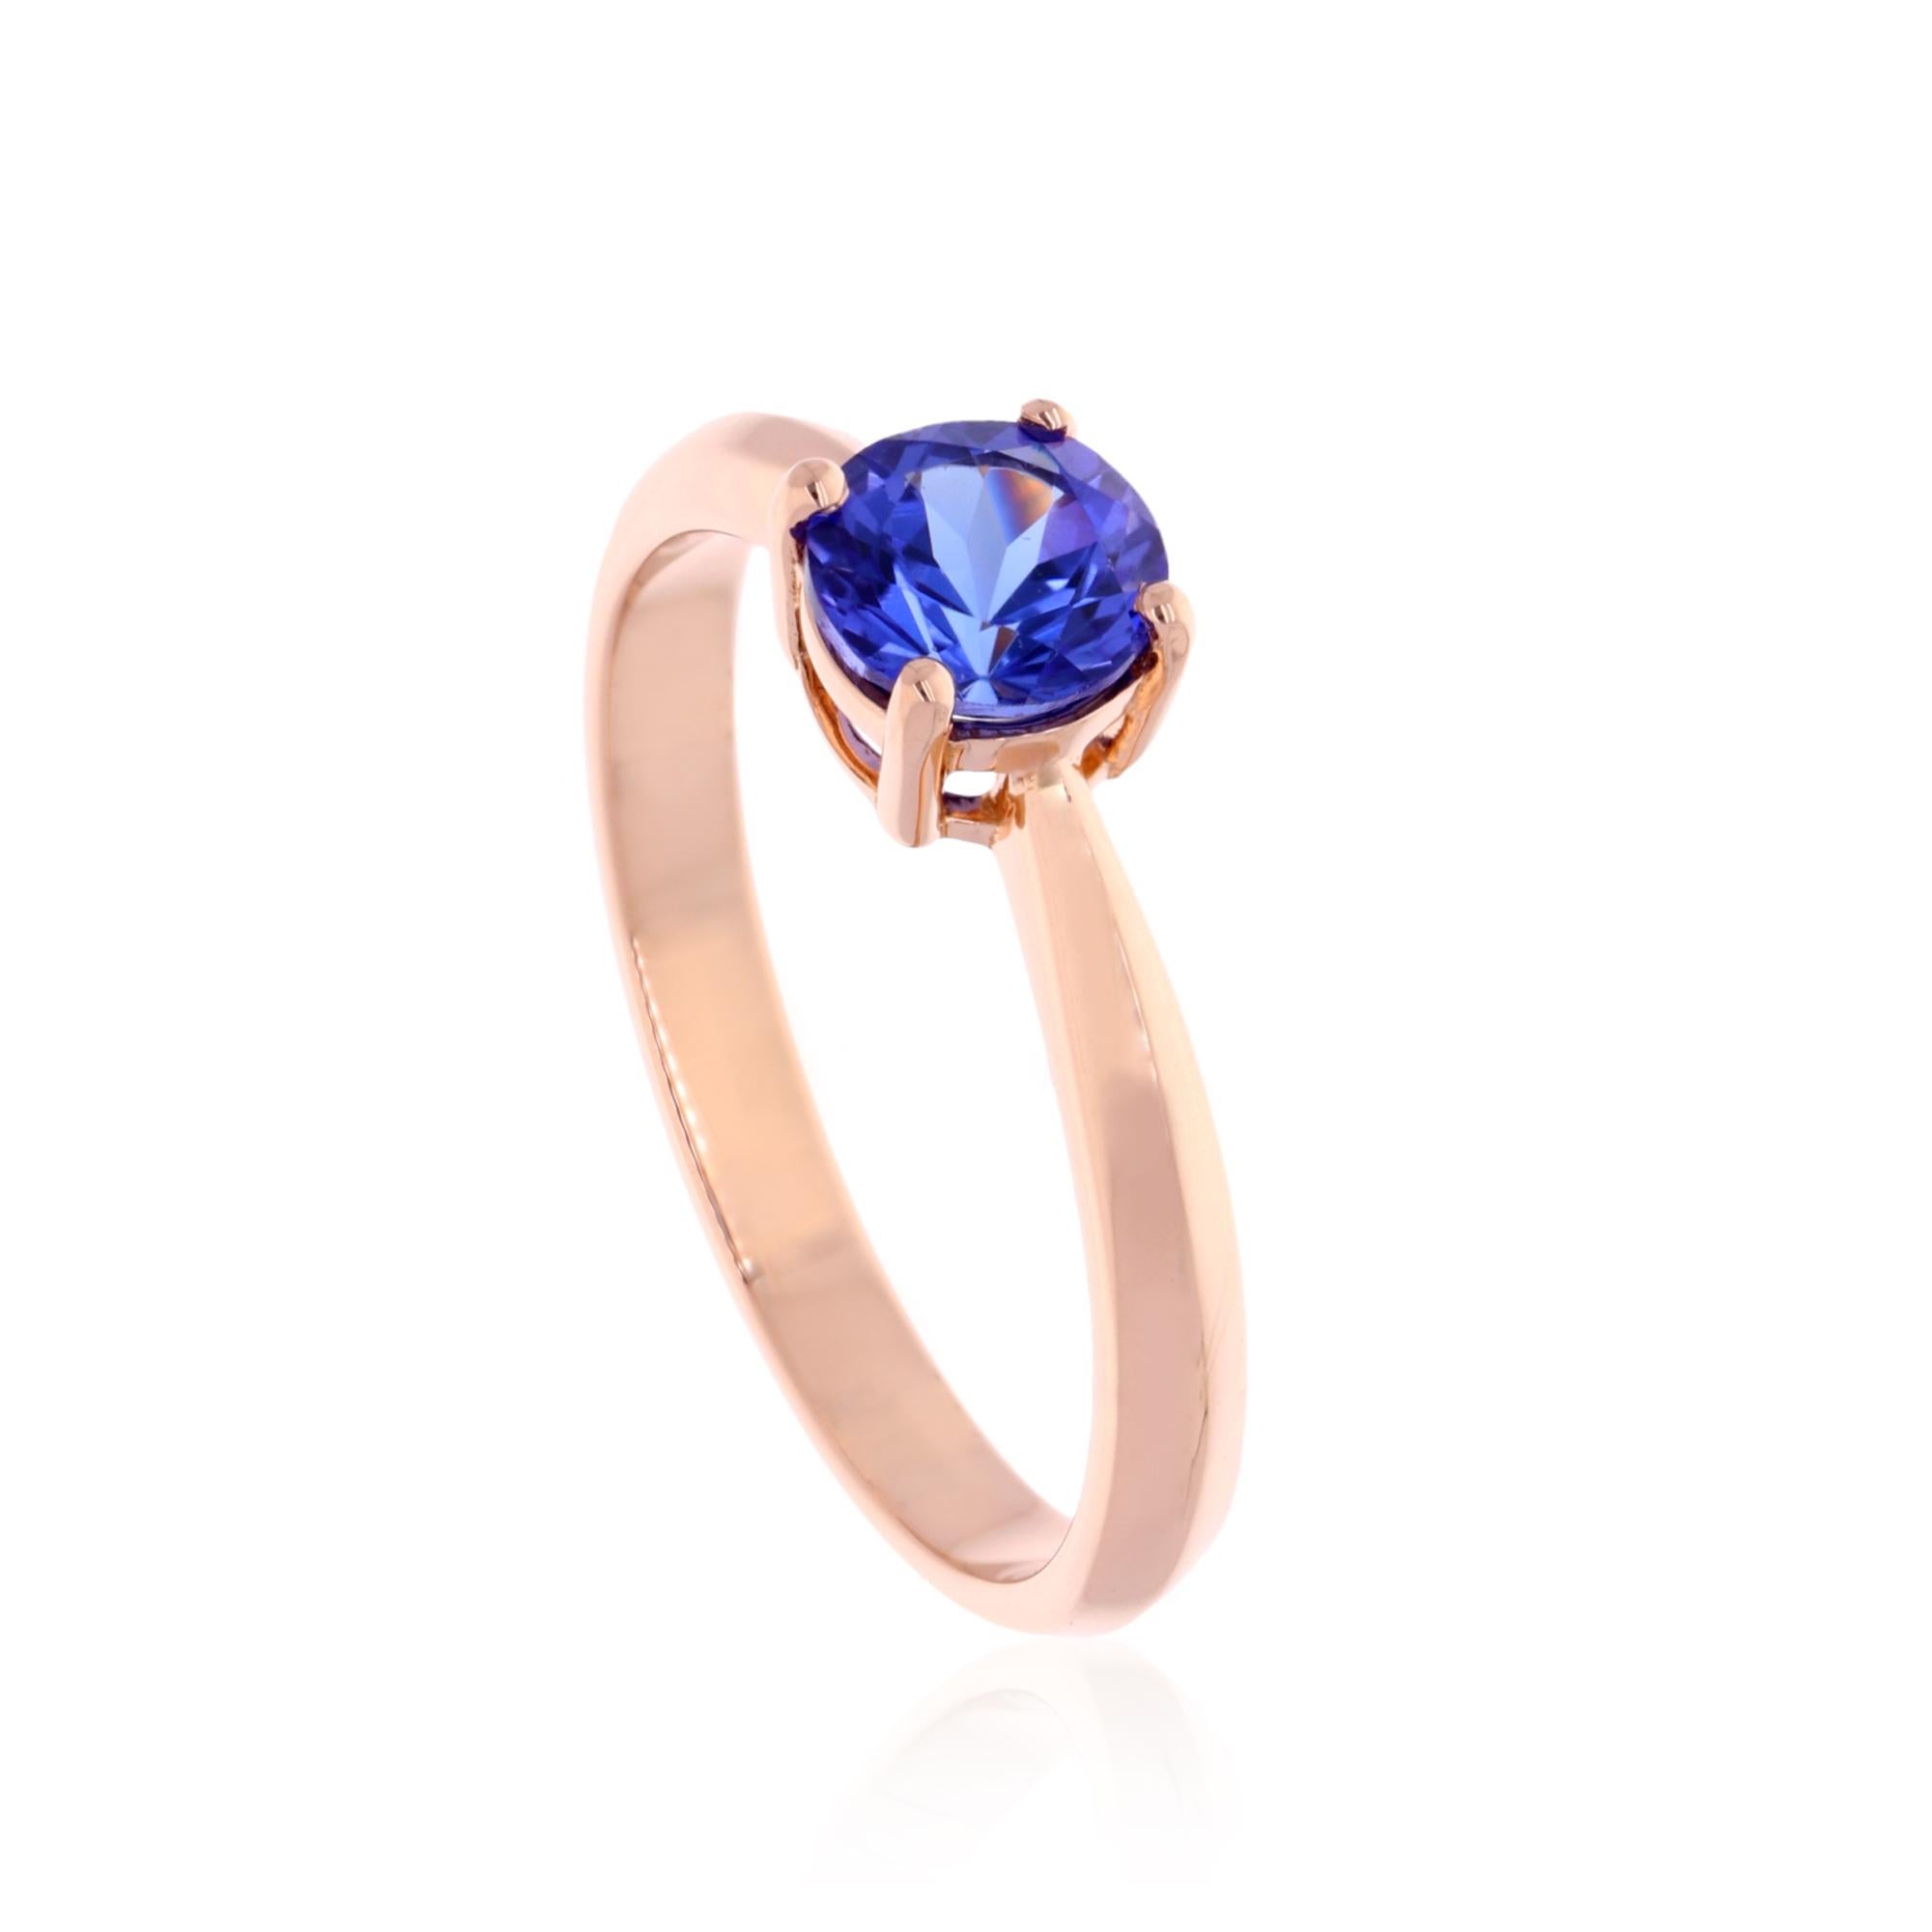 Item Code :- SER-22340
Gross Weight :- 3.47 grams
18k Rose Gold Weight :- 3.29 grams
Natural Tanzanite Weight :- 0.90 Carat
Ring Size :- 7 US & All size available

✦ Sizing
.....................
We can adjust most items to fit your sizing